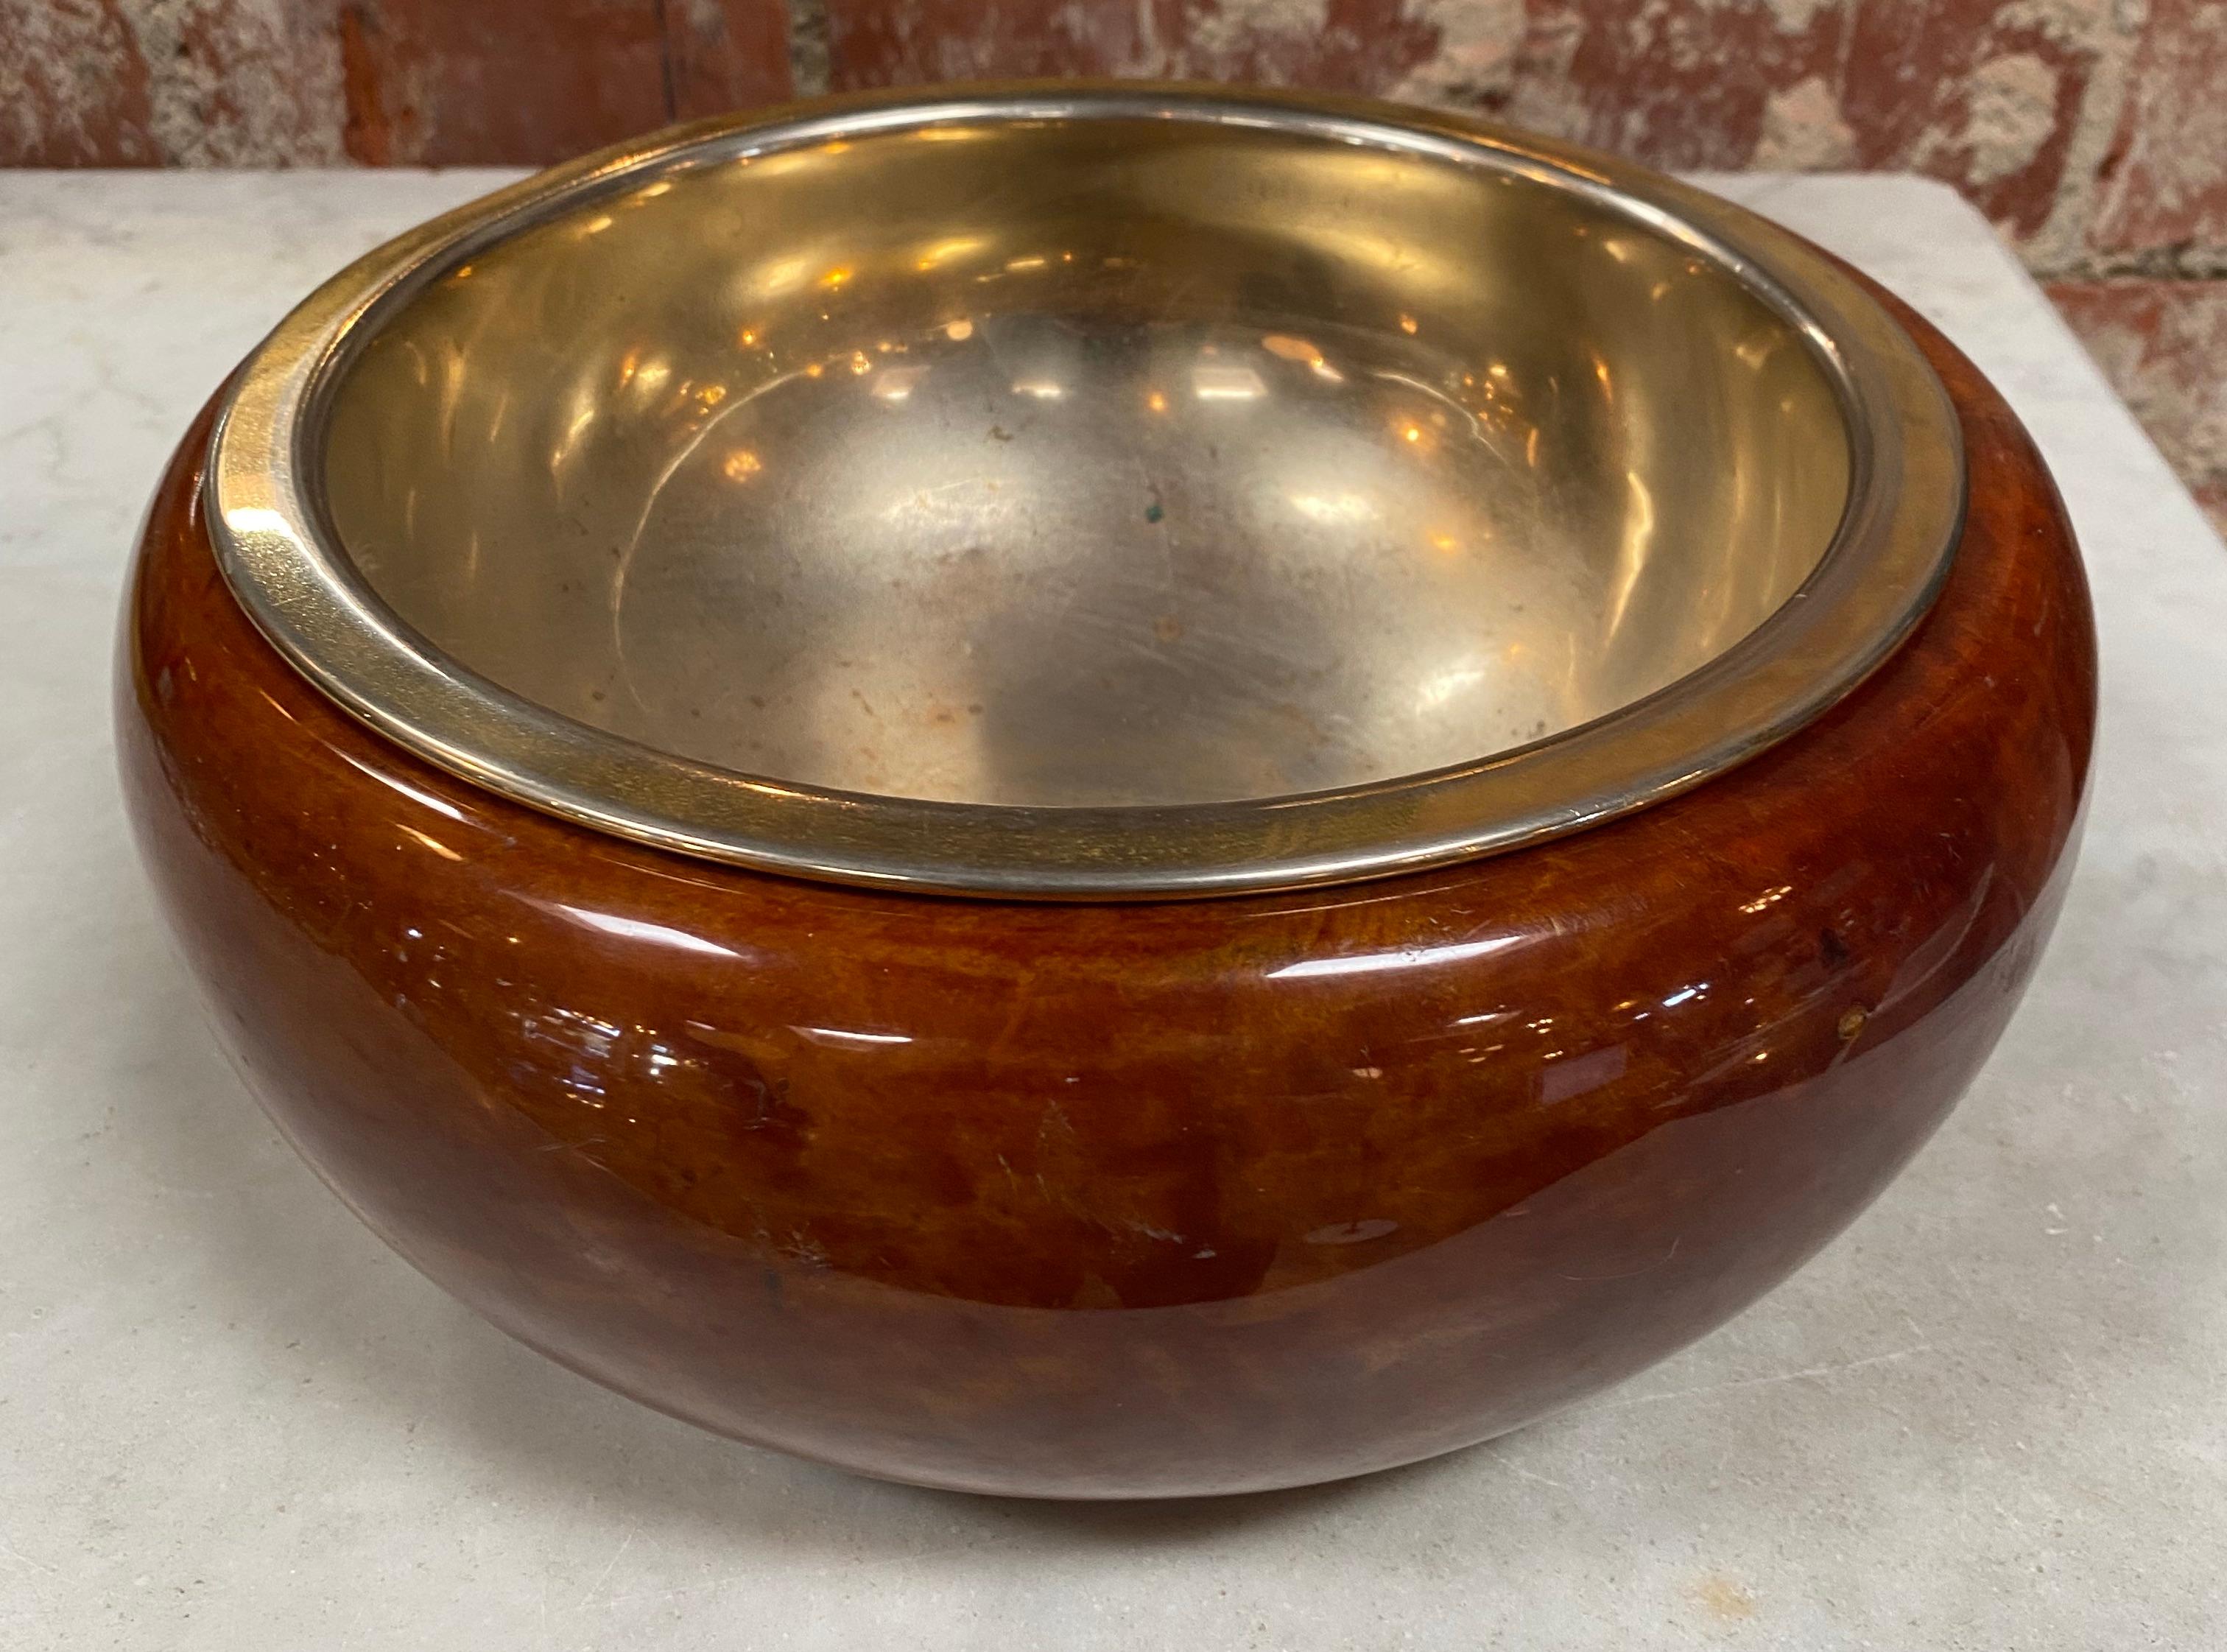 Italian decorative center bowl made with brass and wood.